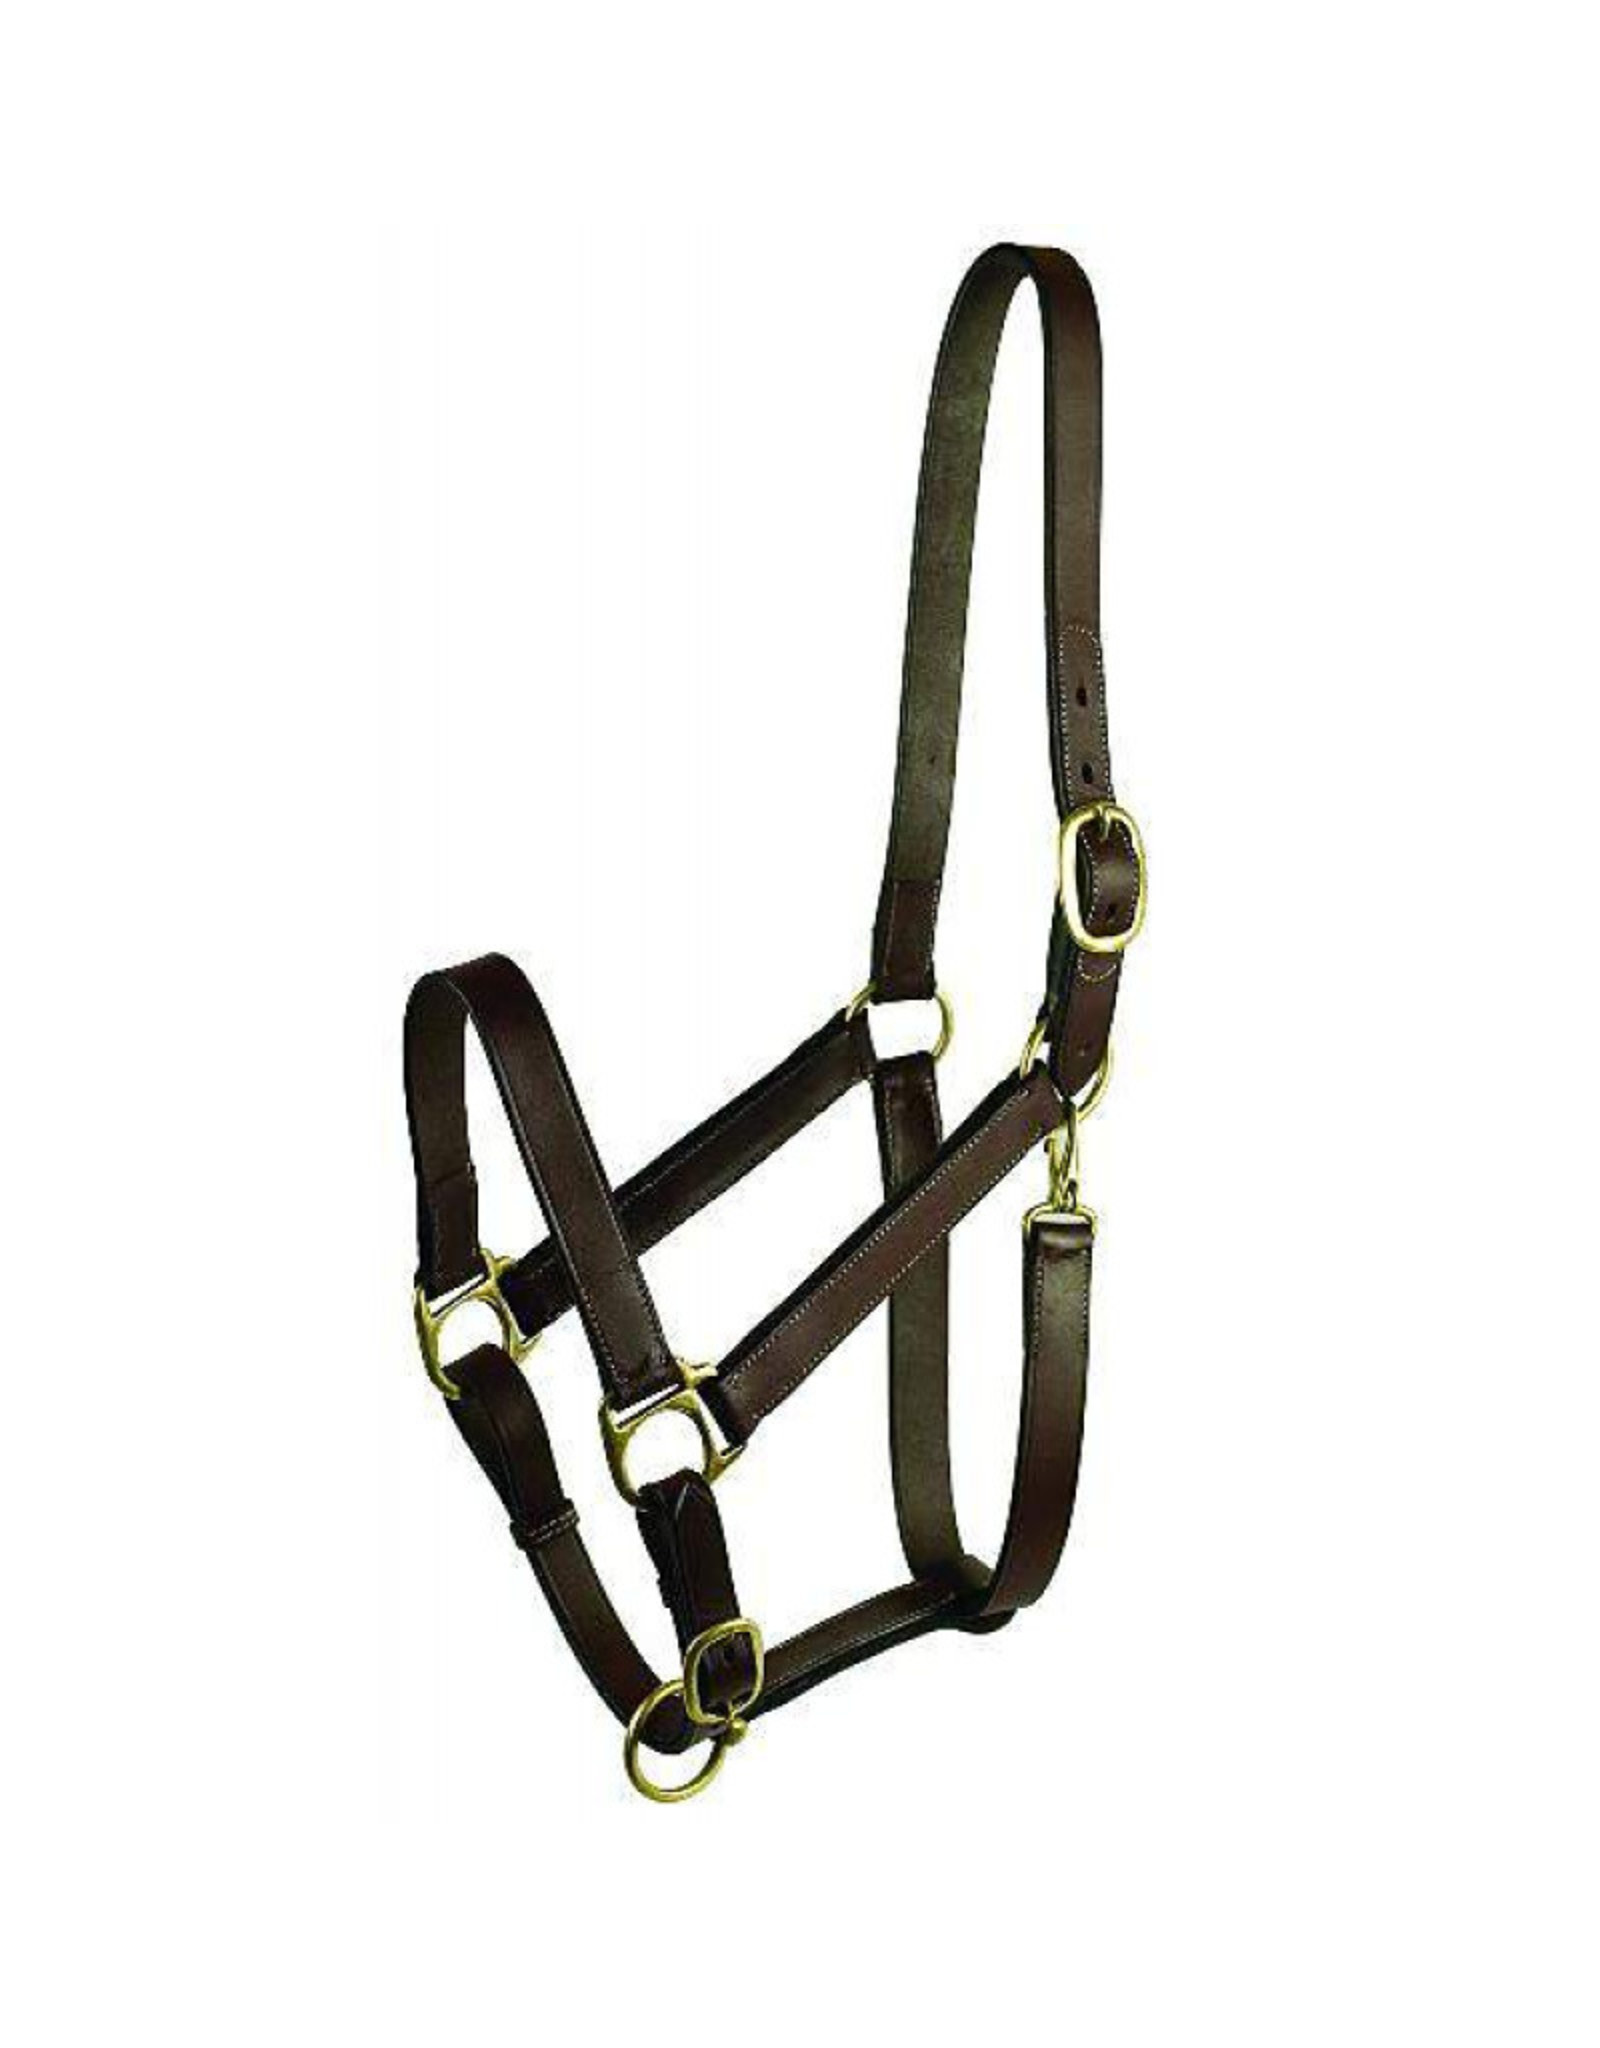 Leather Adj. Halter w/Snap  - YEARLING - GL203-S3Y